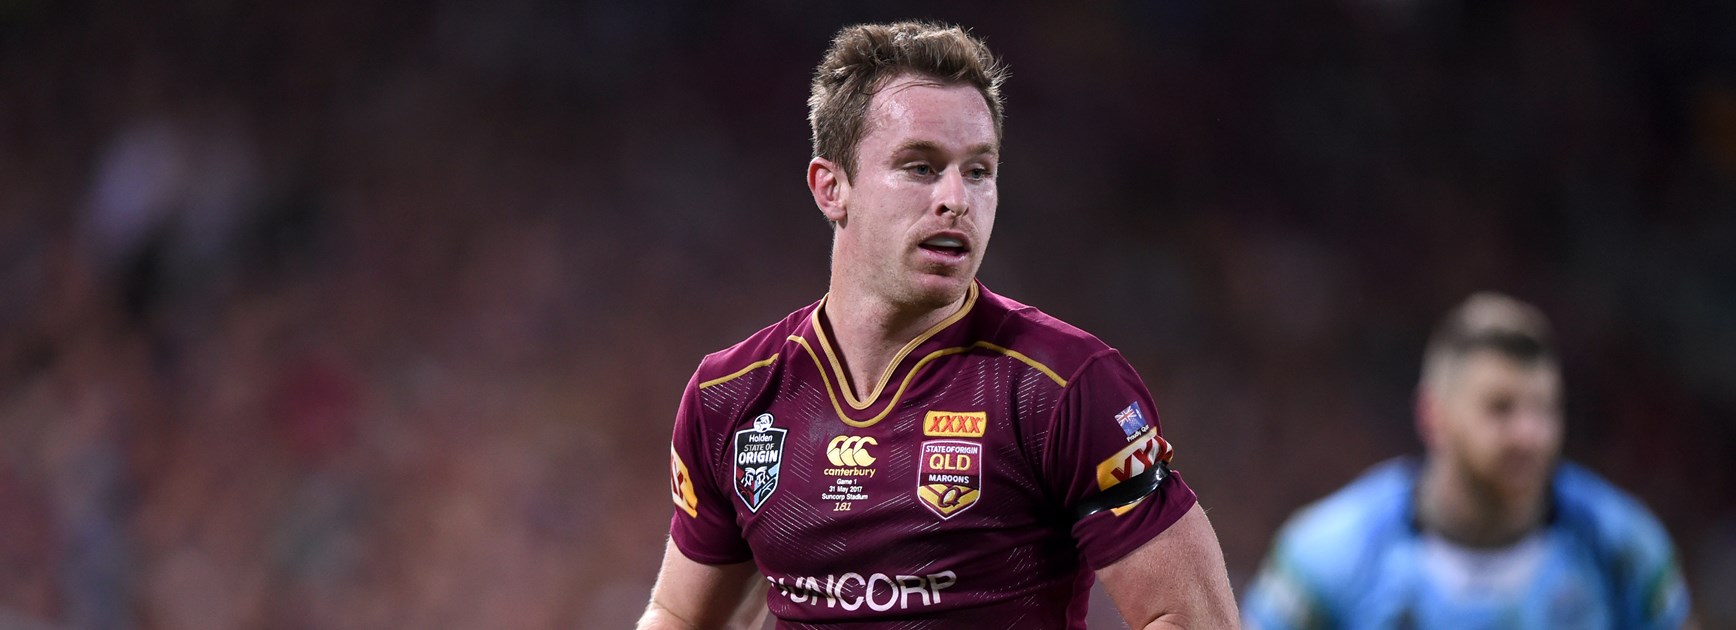 Michael Morgan playing for Queensland.